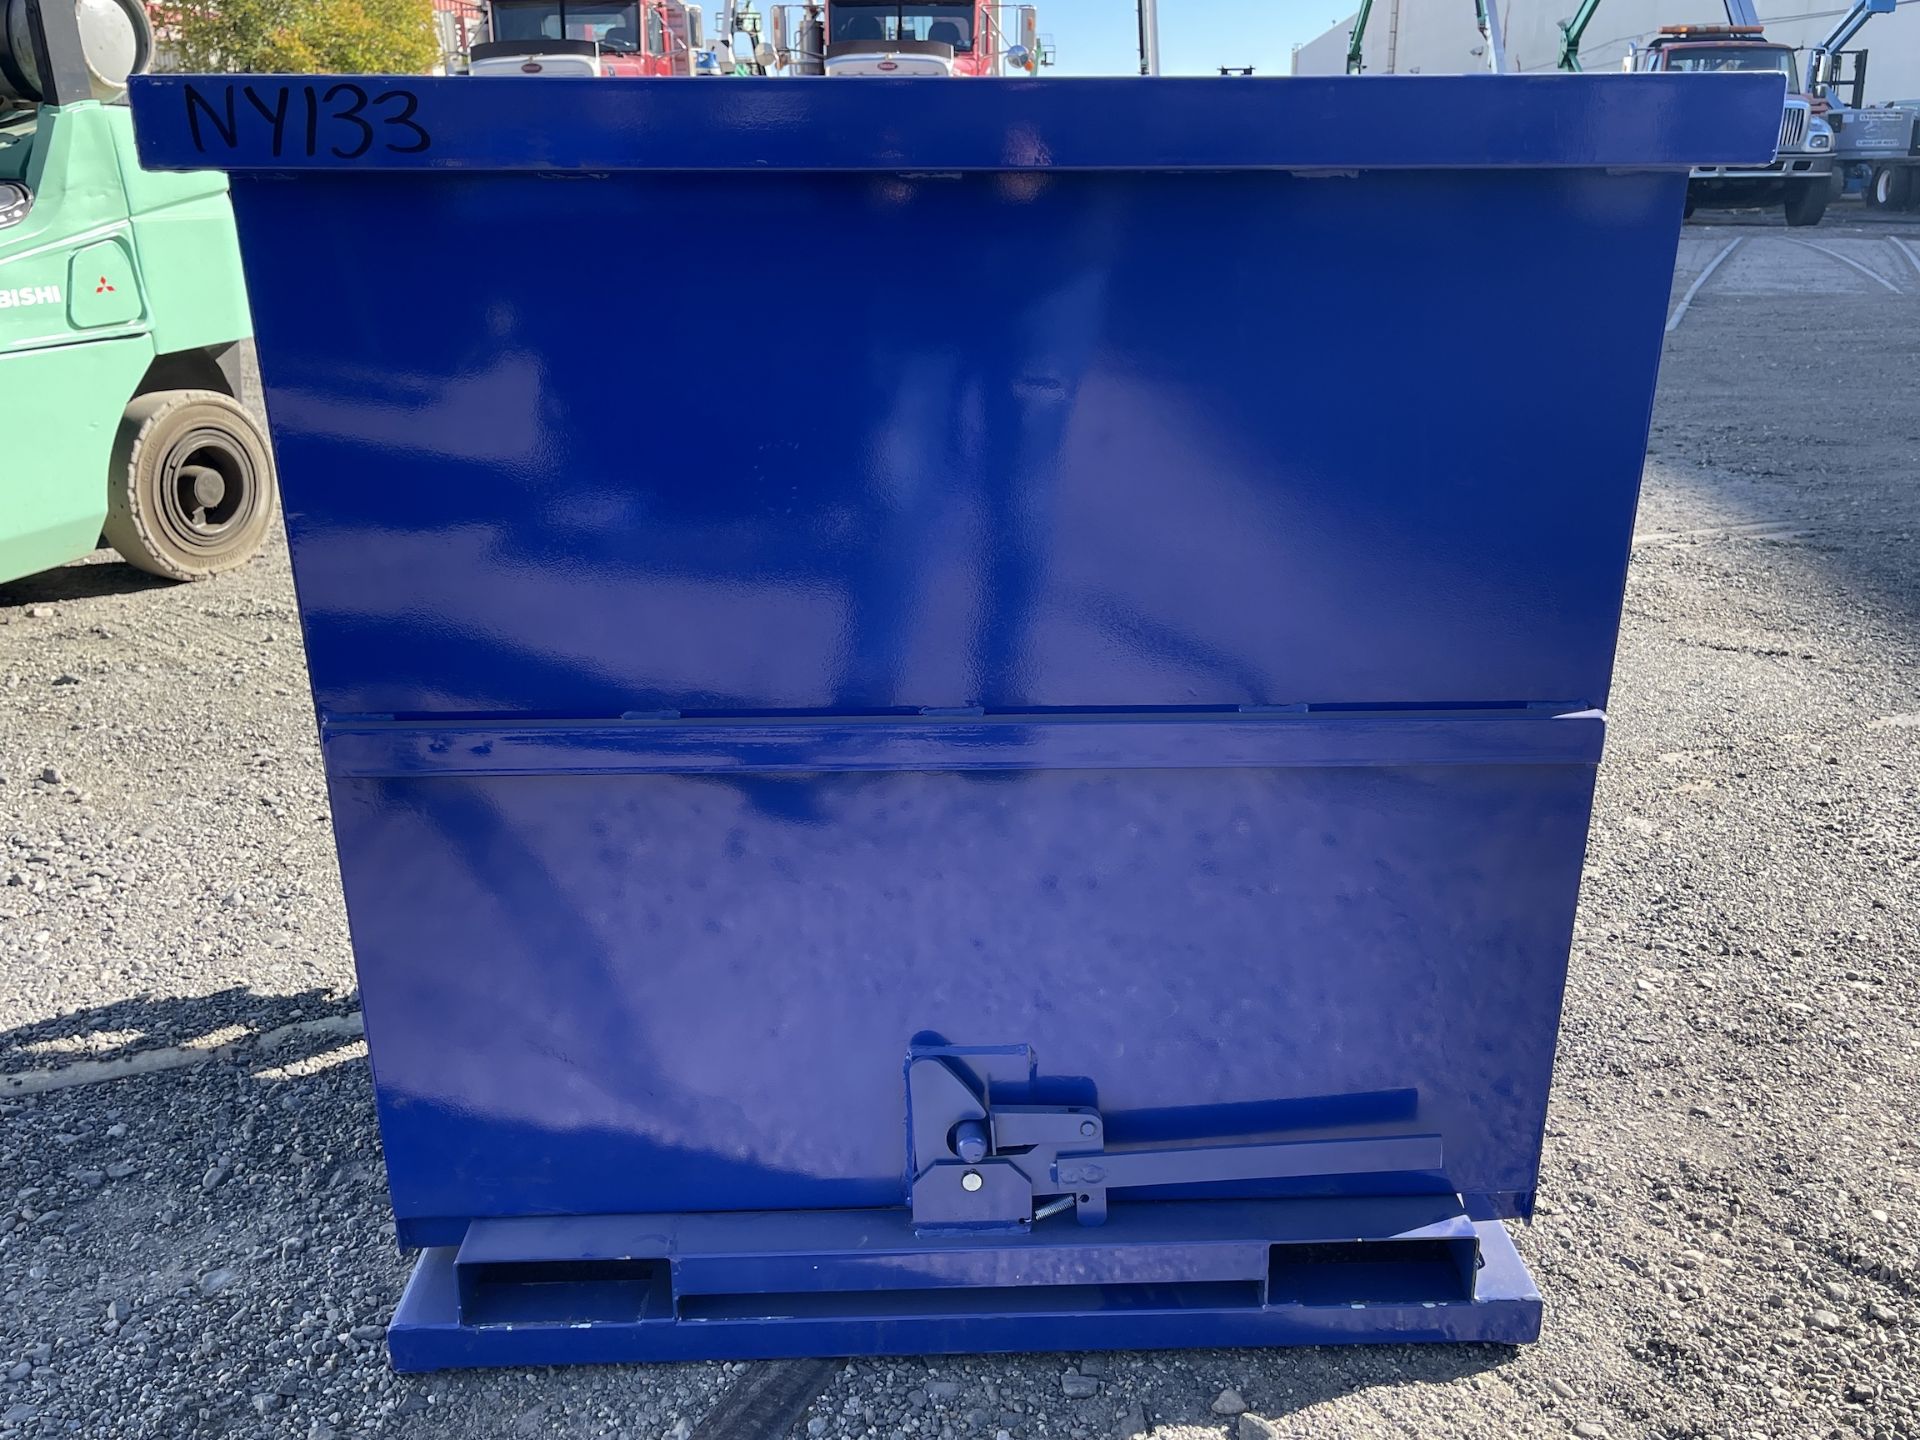 Brand New 1 Cubic Yard Self Dumping Hopper (NY133) - Image 4 of 7